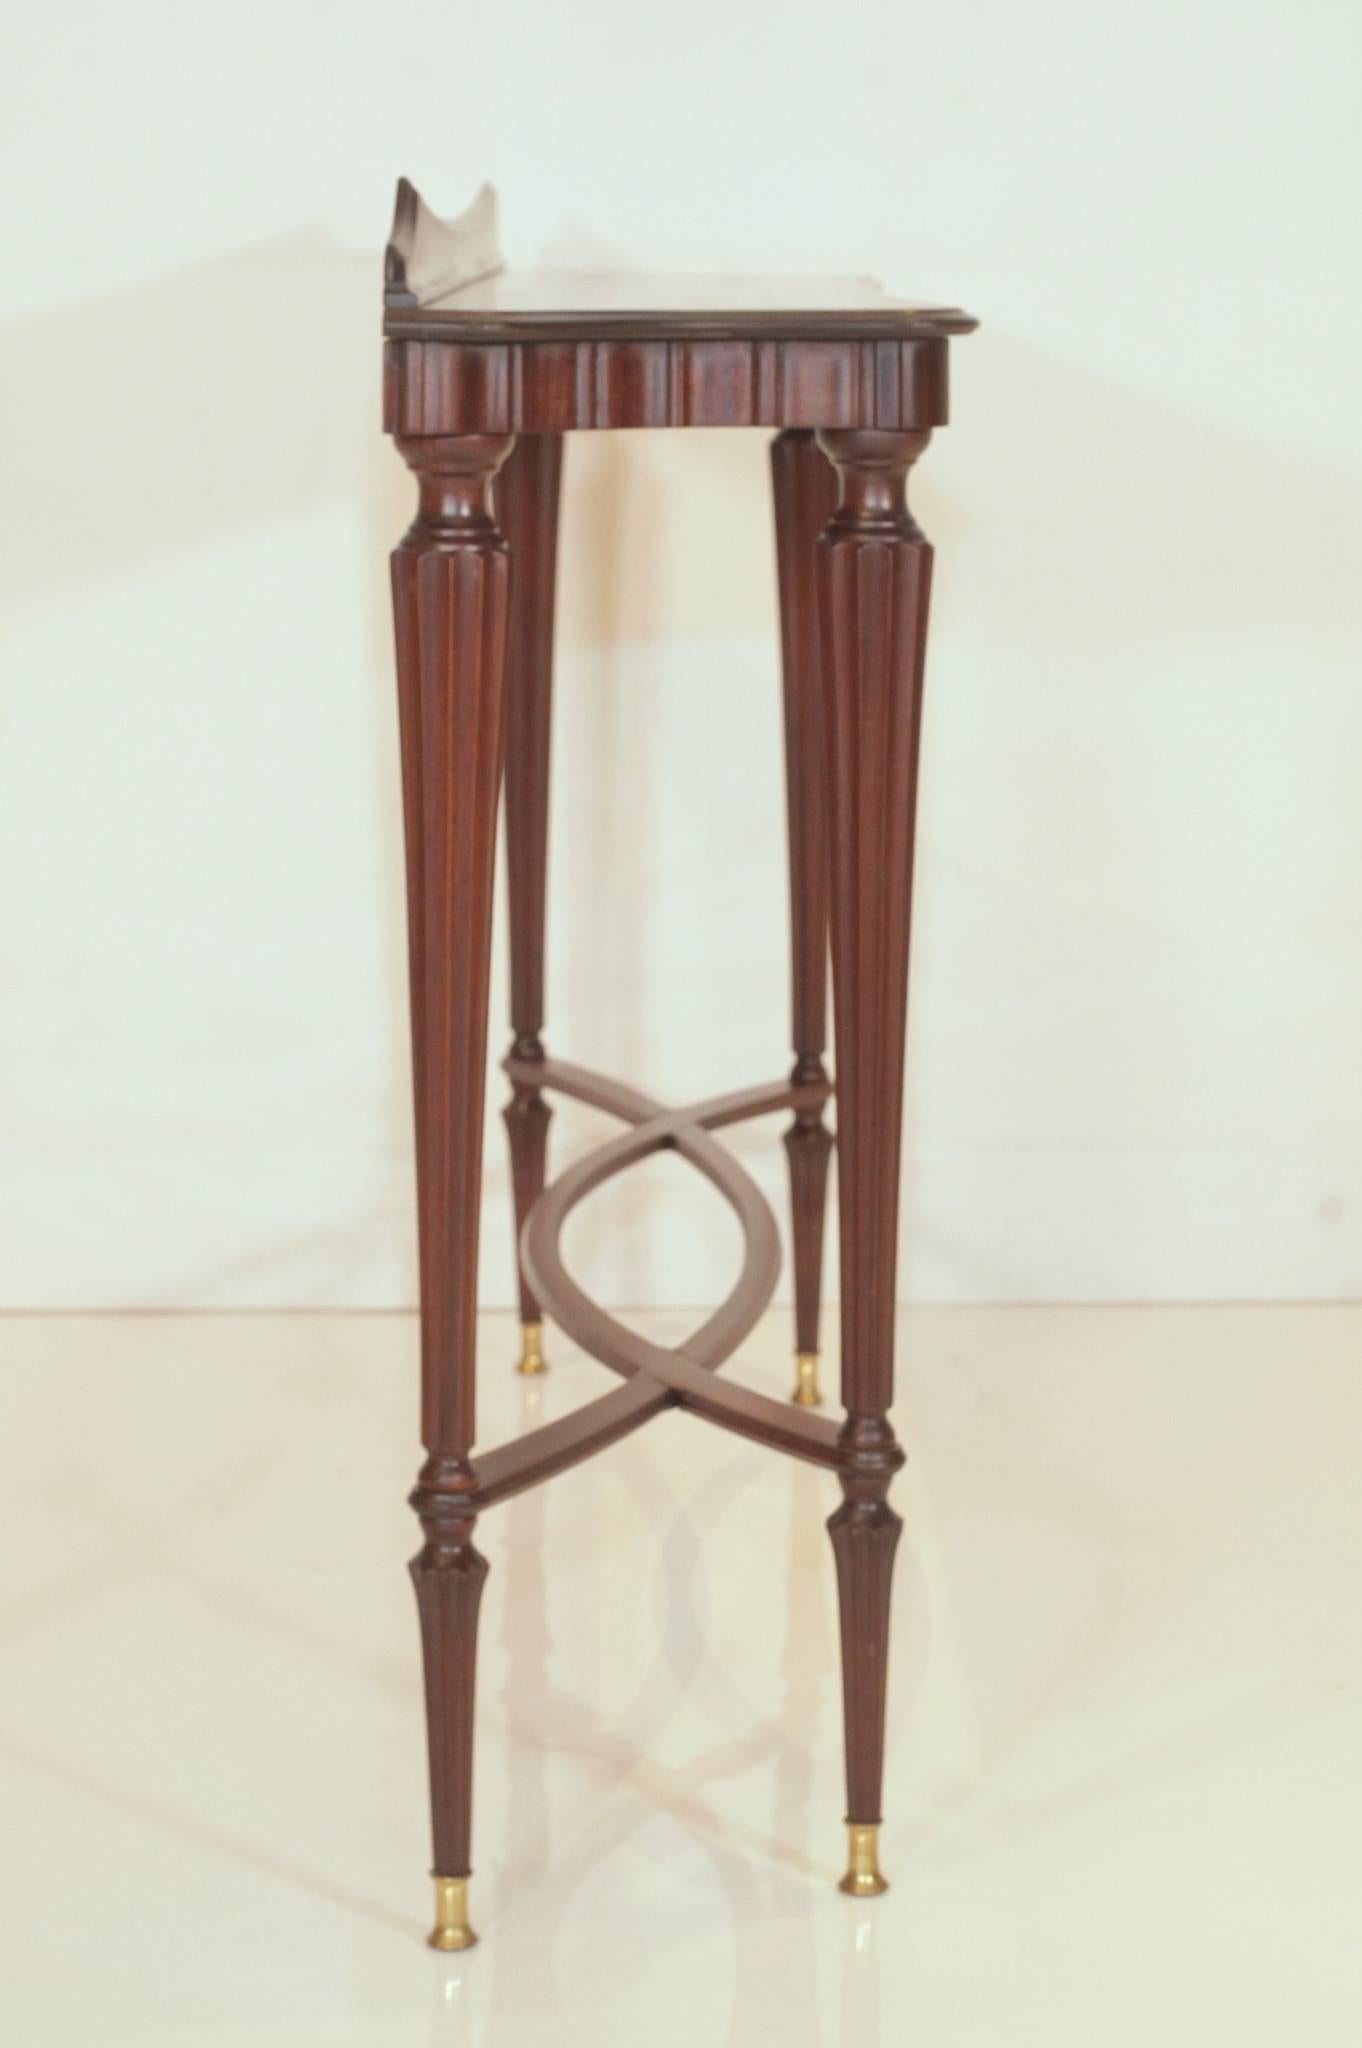 Italian sculpted walnut console table with cross bands and bronze sabots by Paolo Buffa, circa 1945.